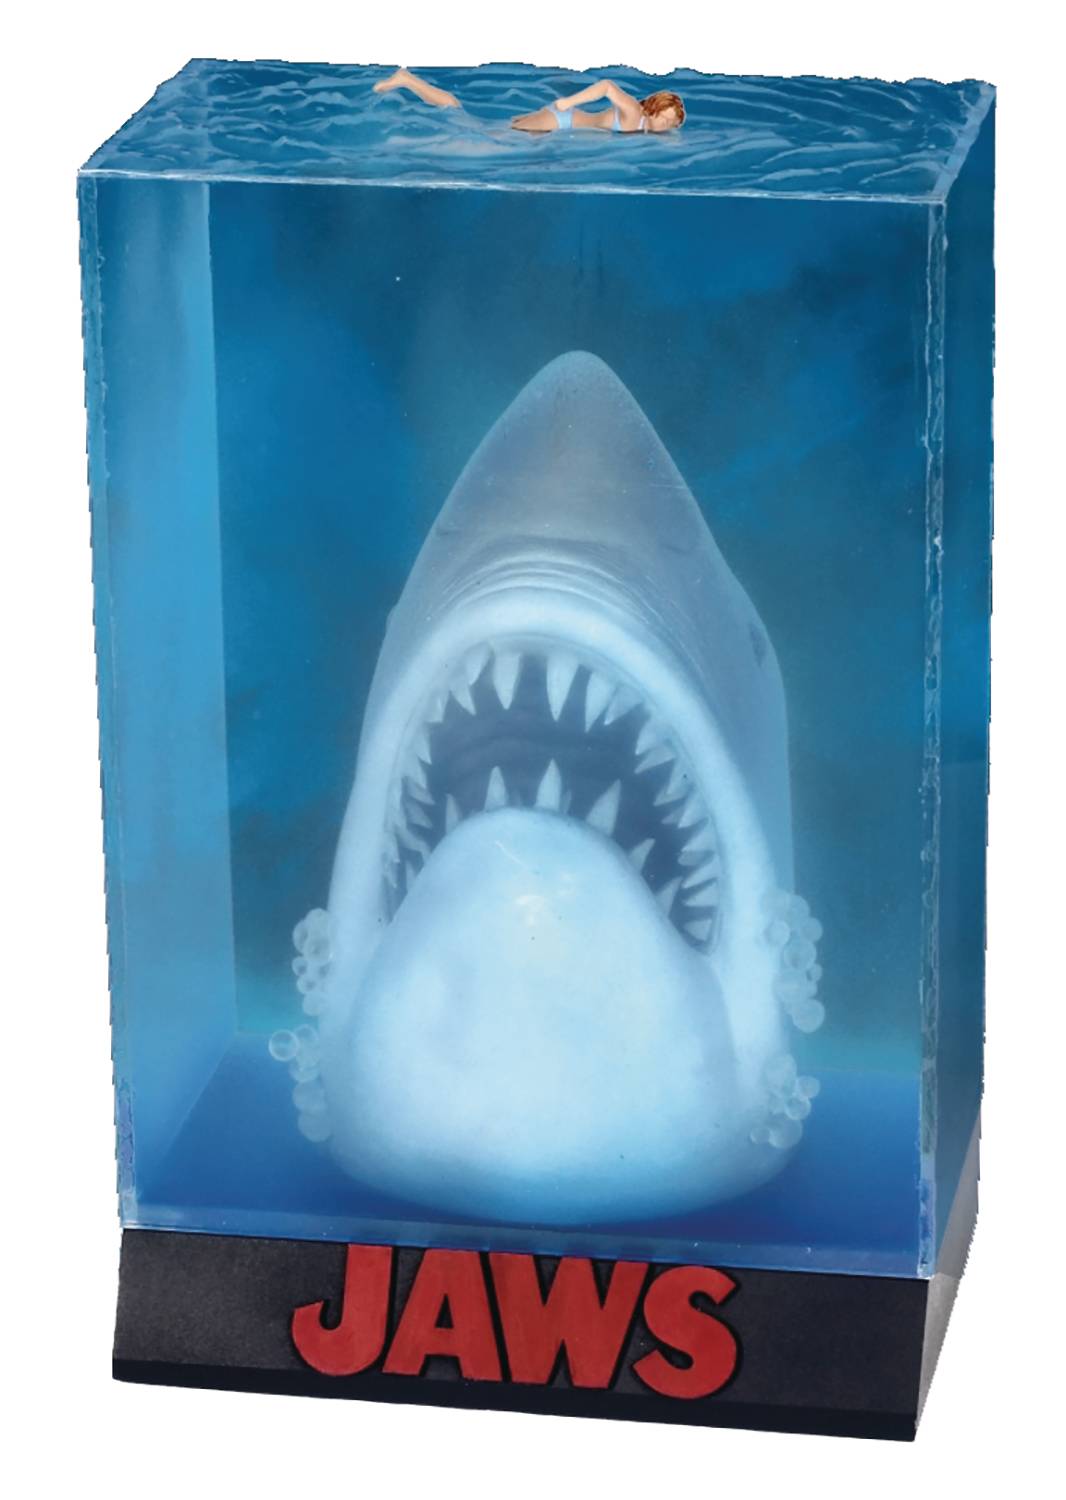 JAWS 3D MOVIE POSTER DIORAMA (RES)